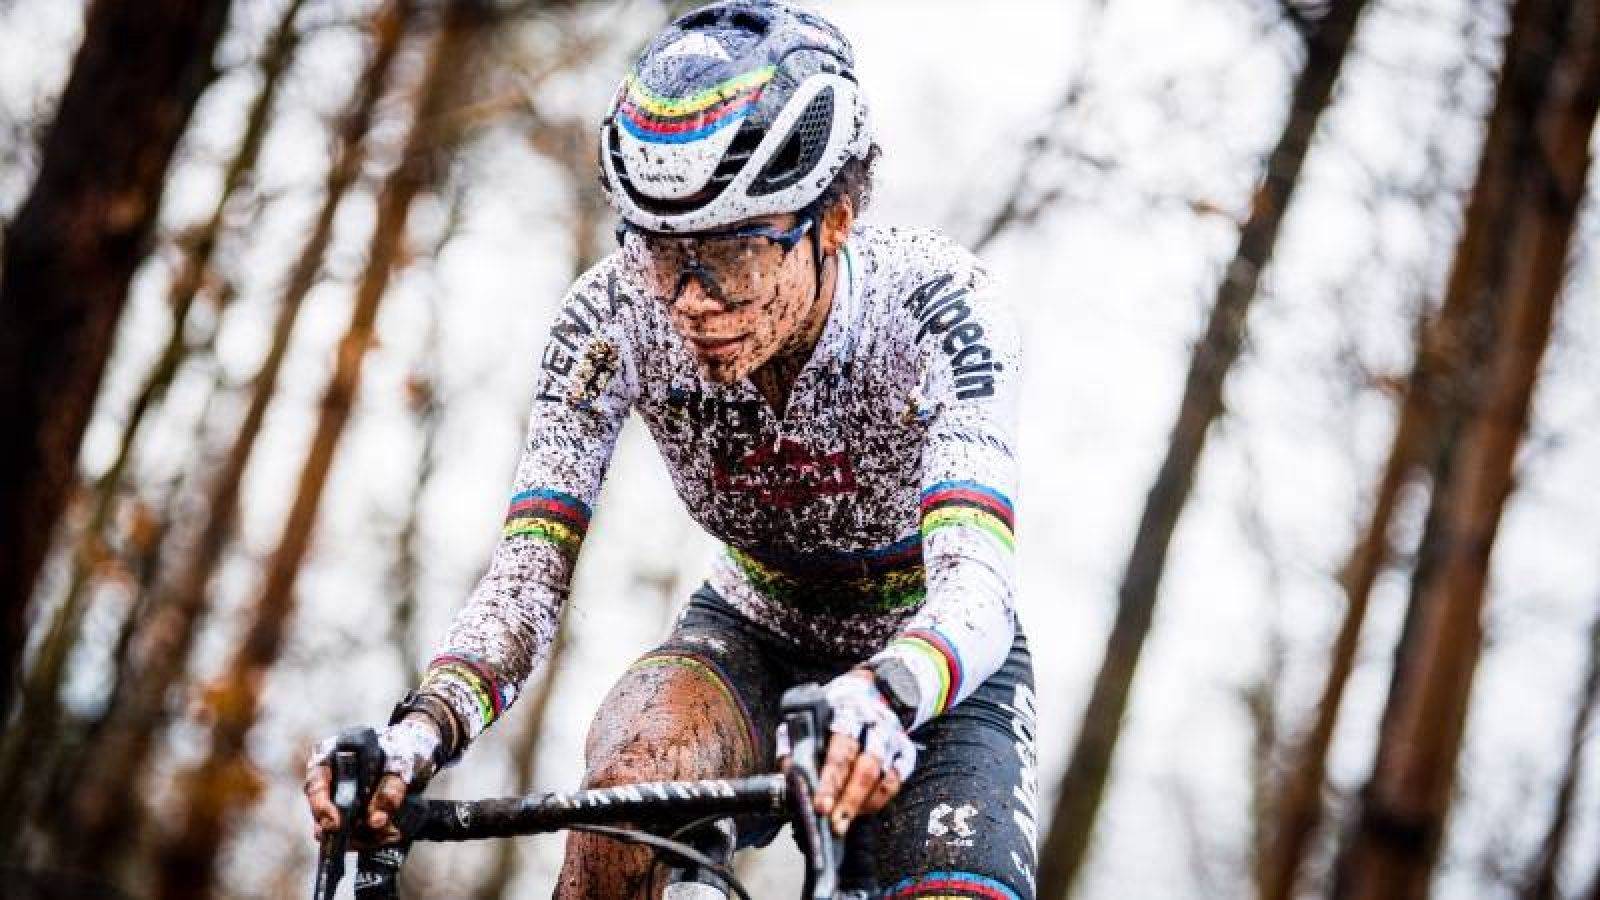 Dutch Ceylin Del Carmen Alvarado pictured in action during the women's elite race of the 'Herentals Crosst' cyclocross cycling race, the fourth stage (out of 8) of the 'X2O Badkamers Trofee Veldrijden' Trophy, Wednesday 23 December 2020 in Herentals. BELGA PHOTO JASPER JACOBS